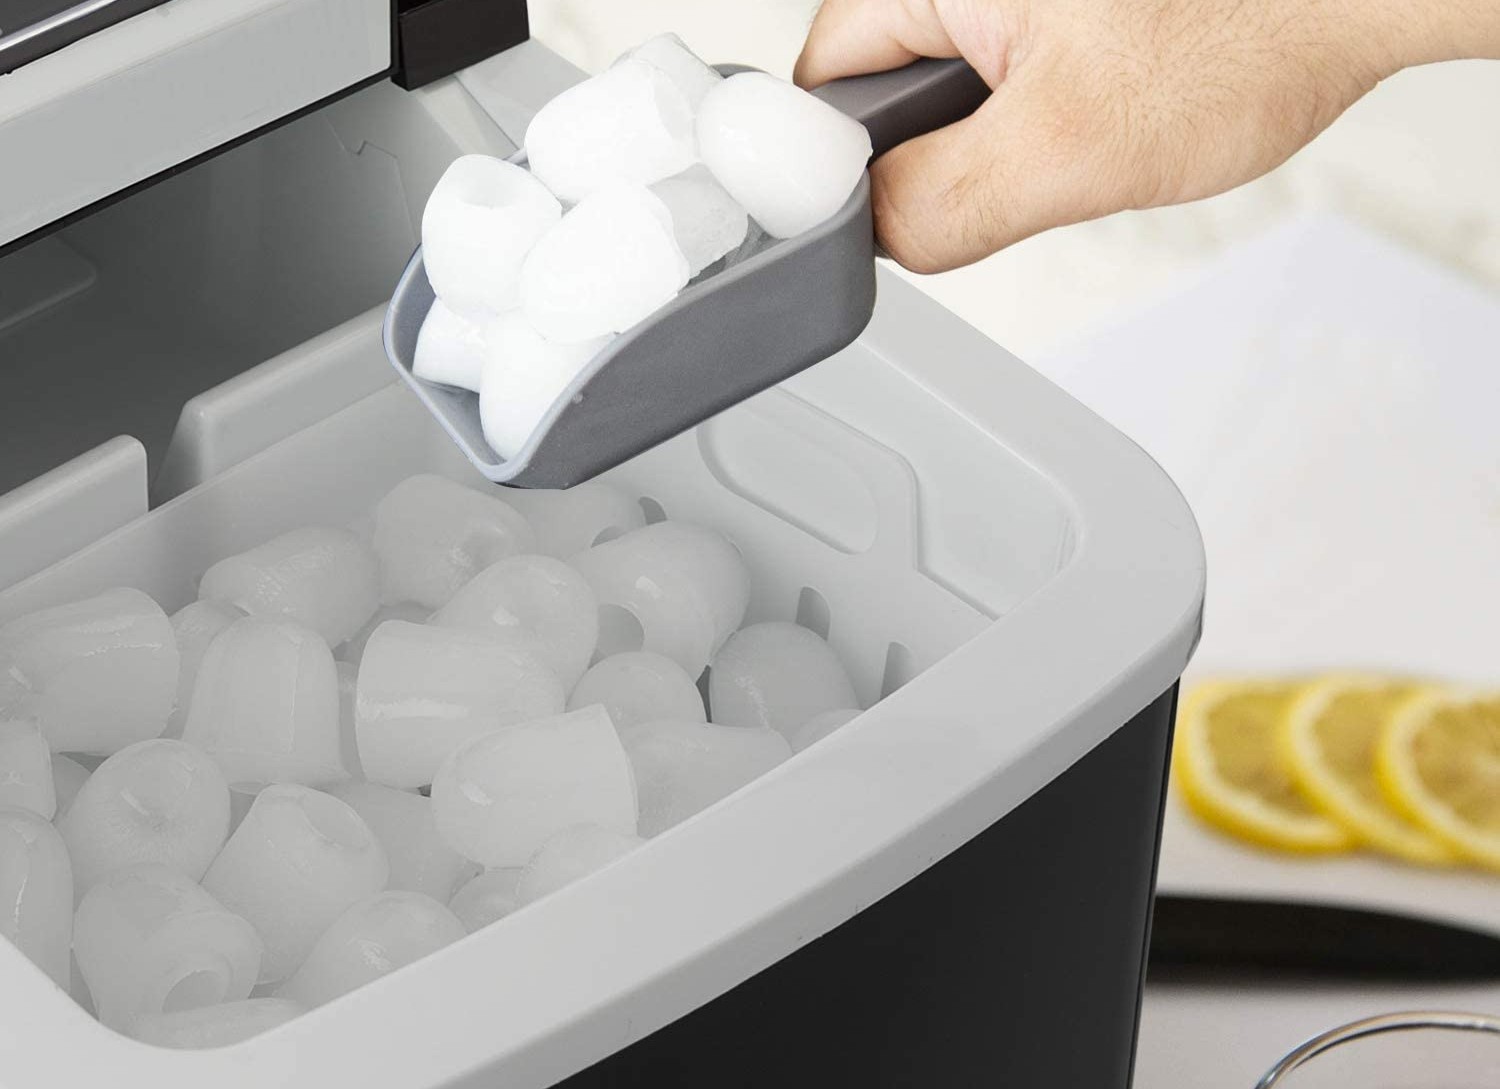 The Best Portable Ice Maker Option